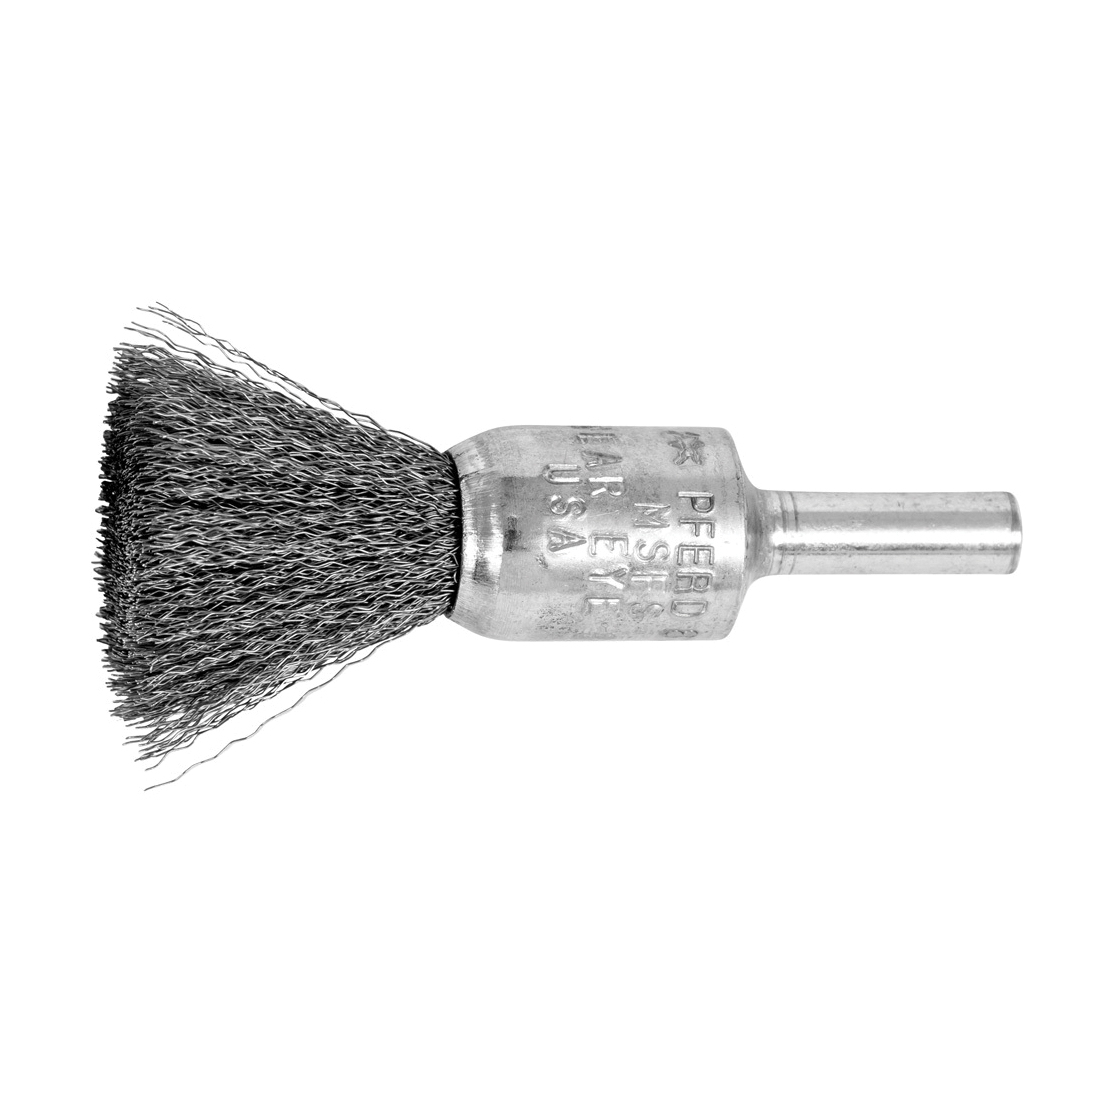 PFERD 82523 External Nut Single Row Cup Brush, 4 in Dia Brush, 5/8-11 Arbor Hole, 0.023 in Dia Filament/Wire, Standard/Twist Knot, Carbon Steel Fill